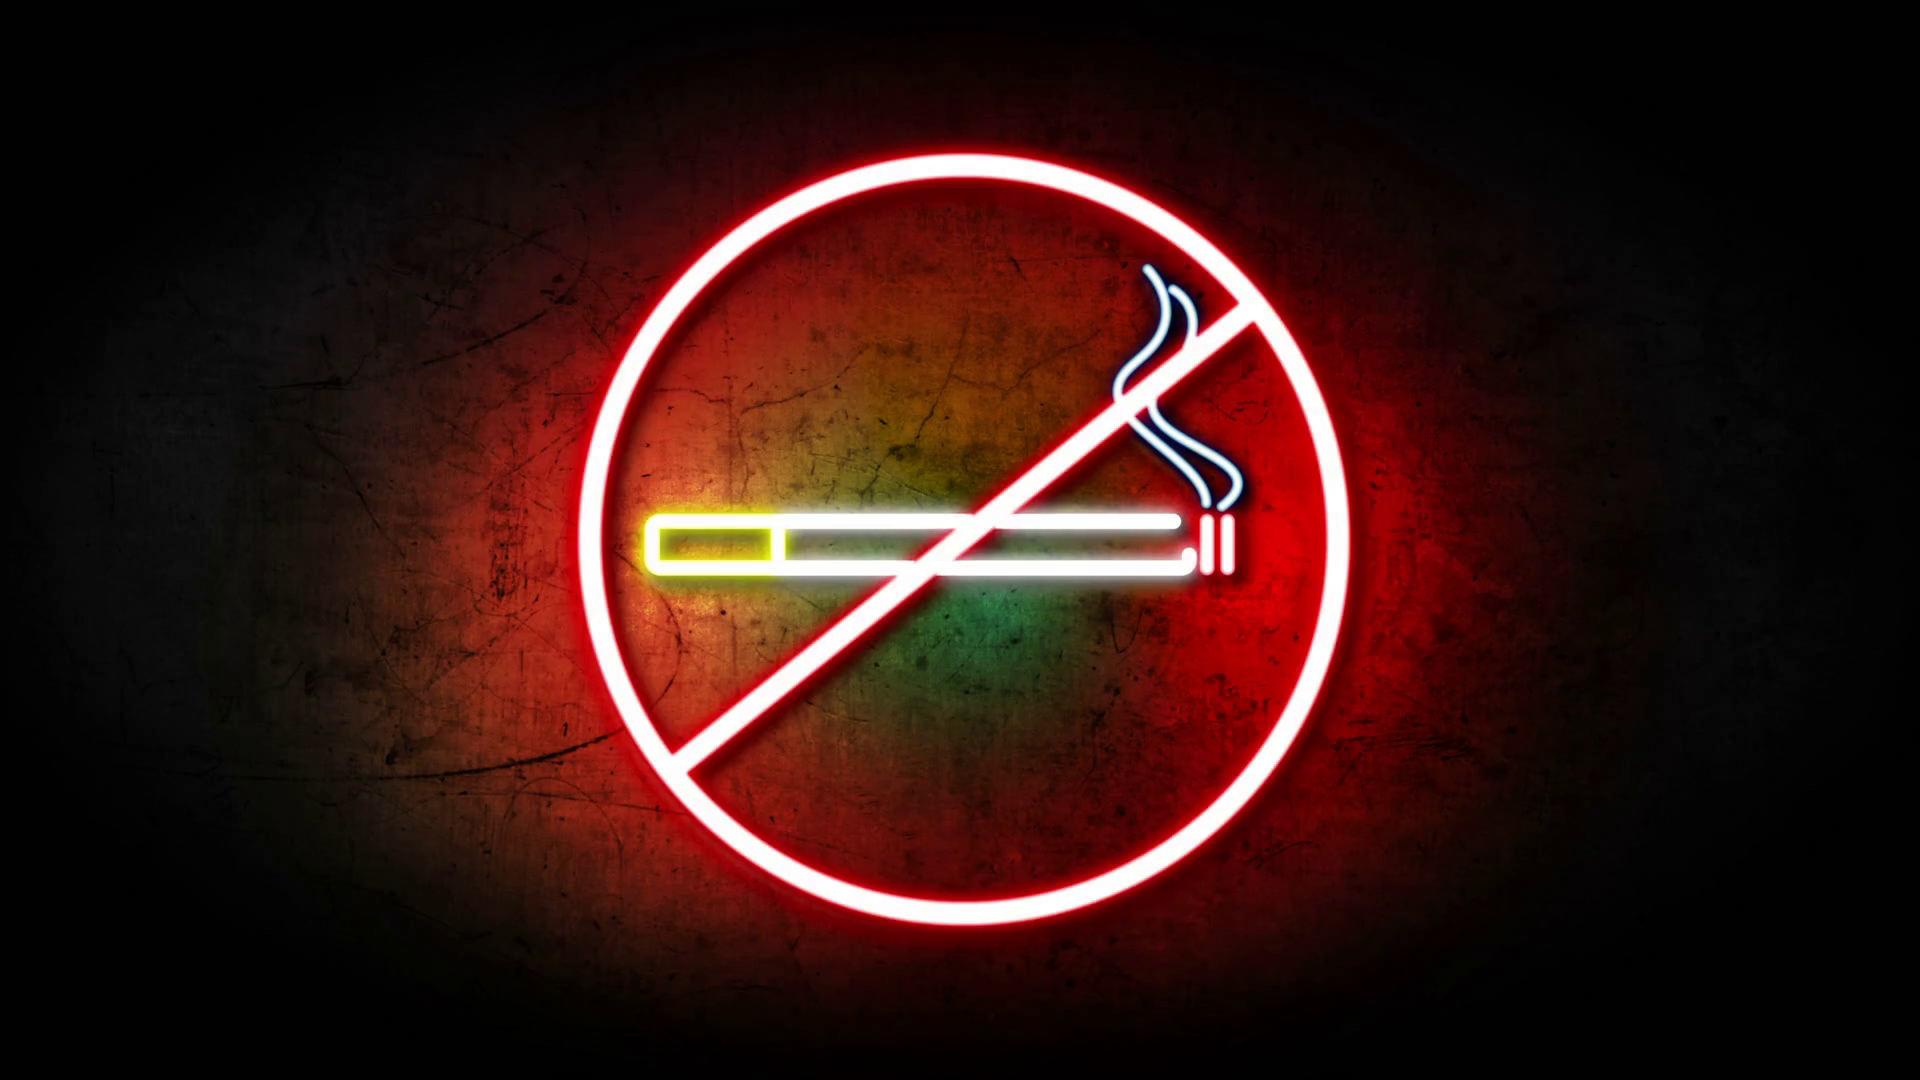 Neon No Smoking Sign Turning On And Blinking On Grunge - Full Hd No Smoking , HD Wallpaper & Backgrounds